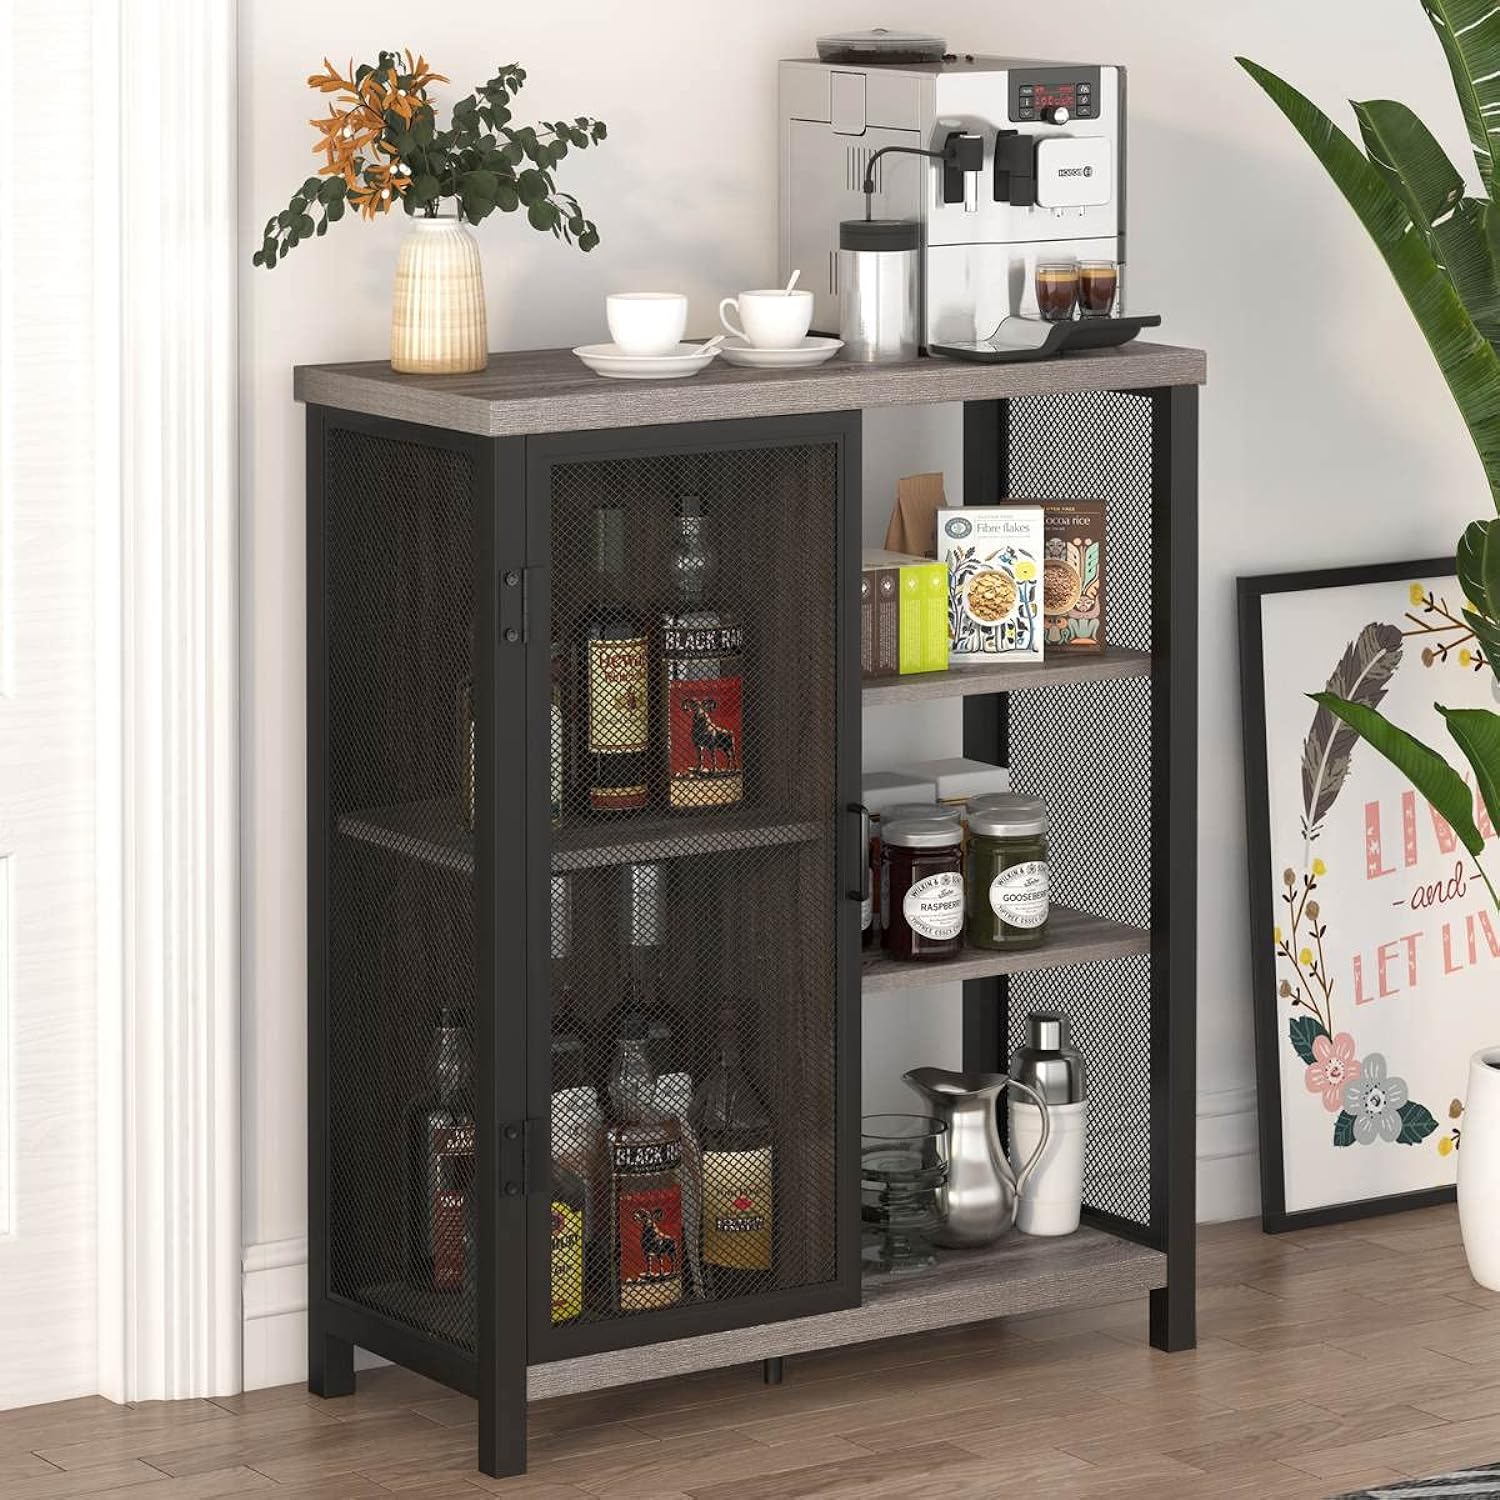 TKM Home Farmhouse Coffee Bar Cabinet With Storage, Industrial Accent Cabinet With Adjustable Shelves, Rustic Small Buffet An?